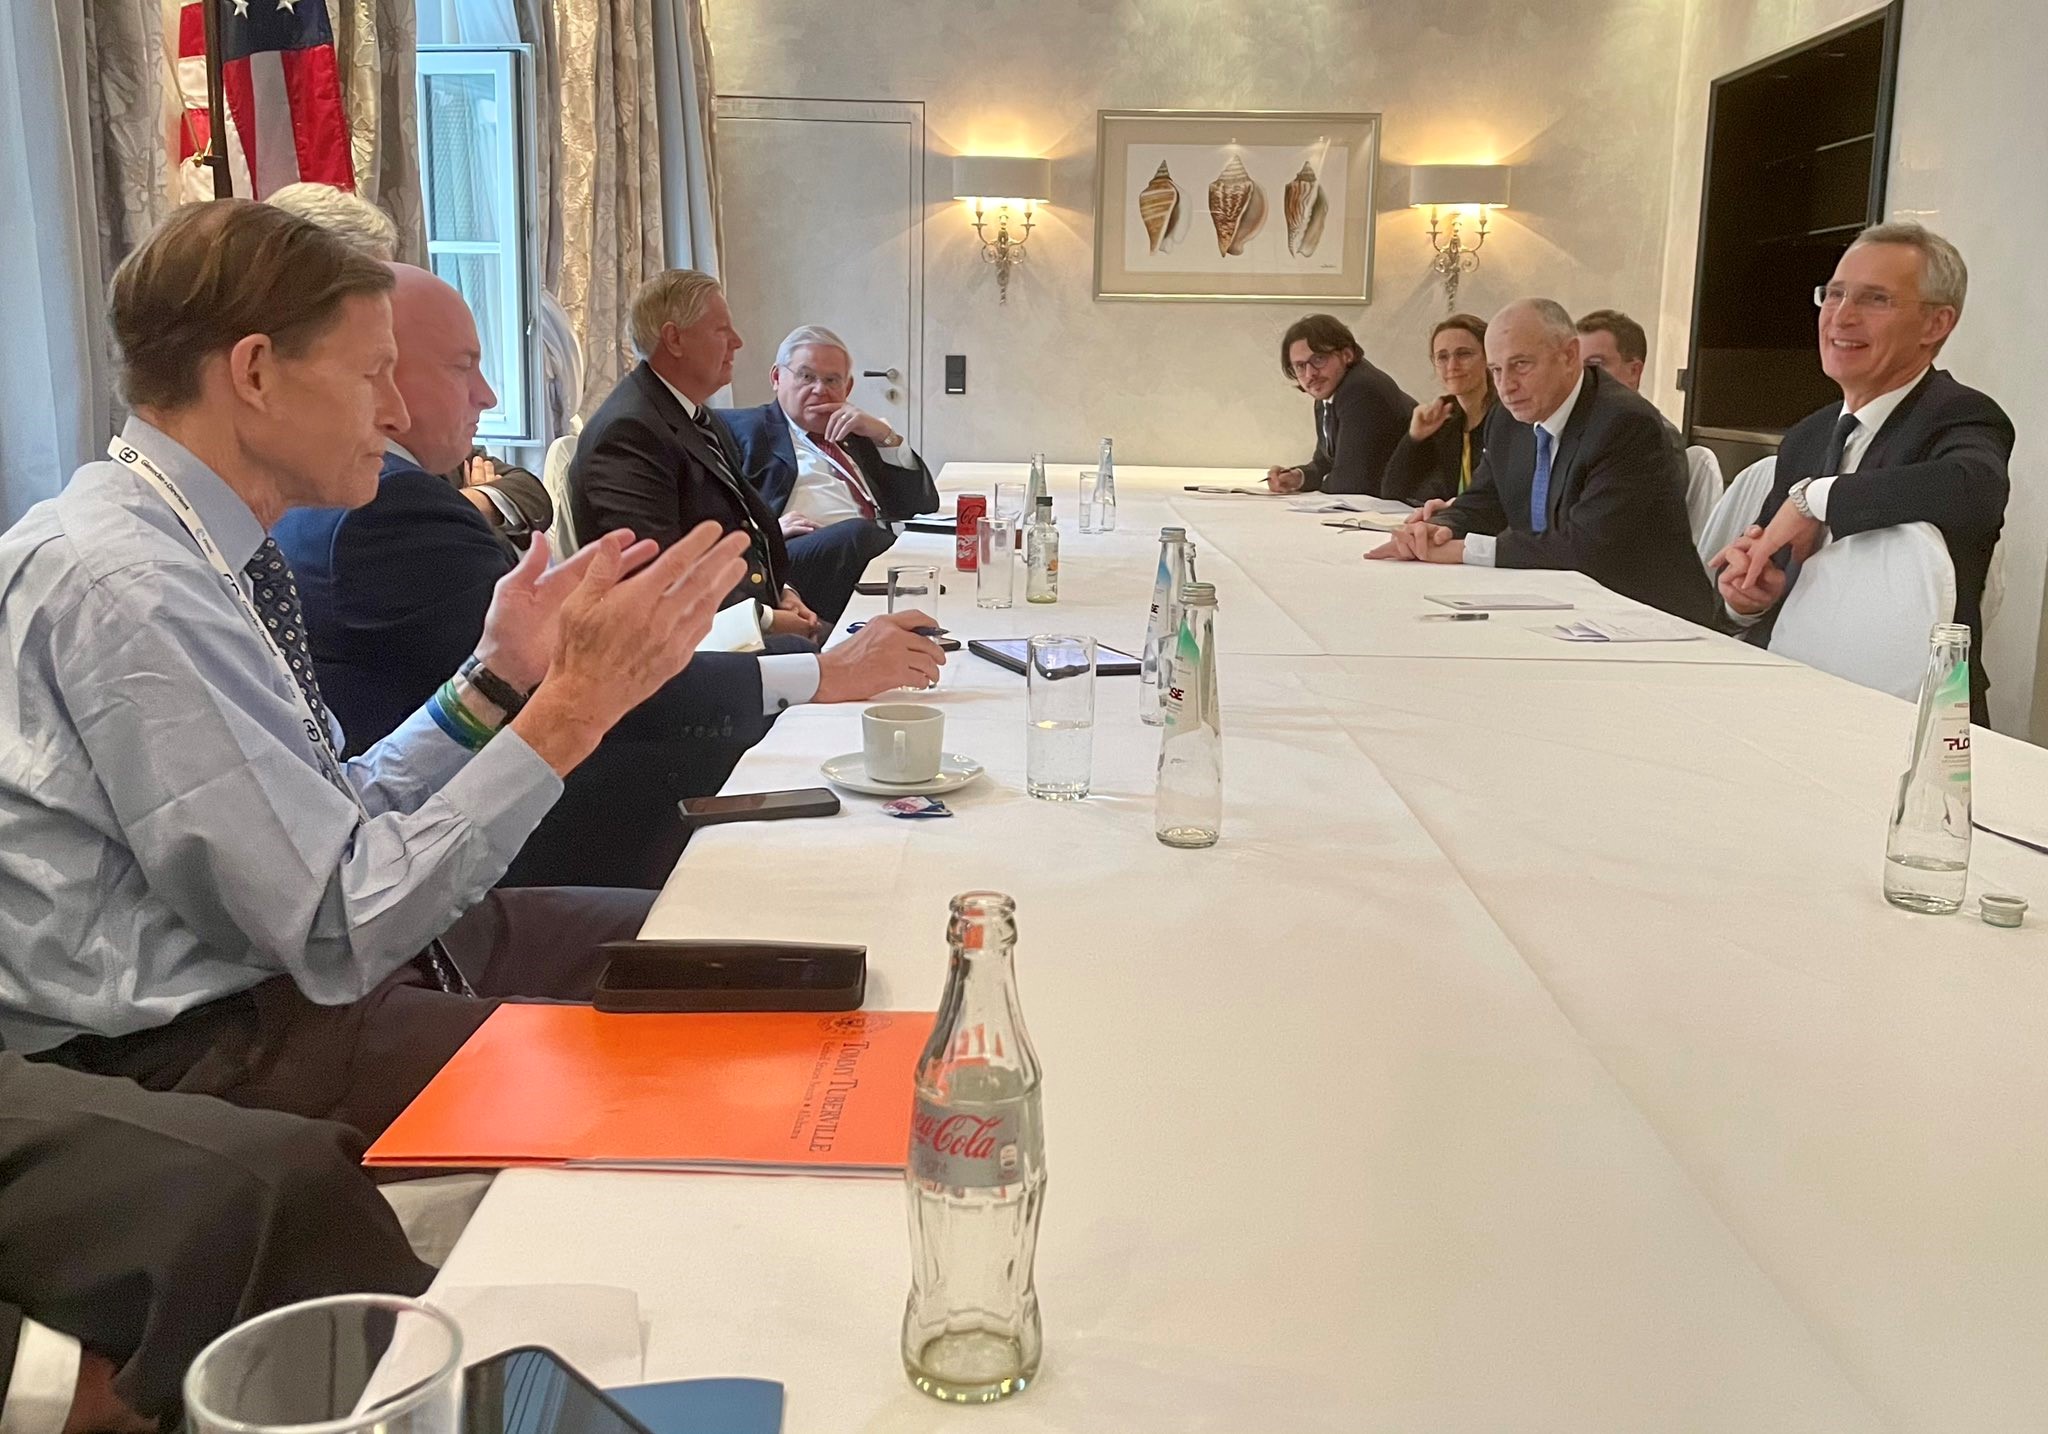 Blumenthal attended the Munich Security Conference (MSC) with a bipartisan congressional delegation led by U.S. Senators Lindsey Graham (R-SC) and Sheldon Whitehouse (D-RI).